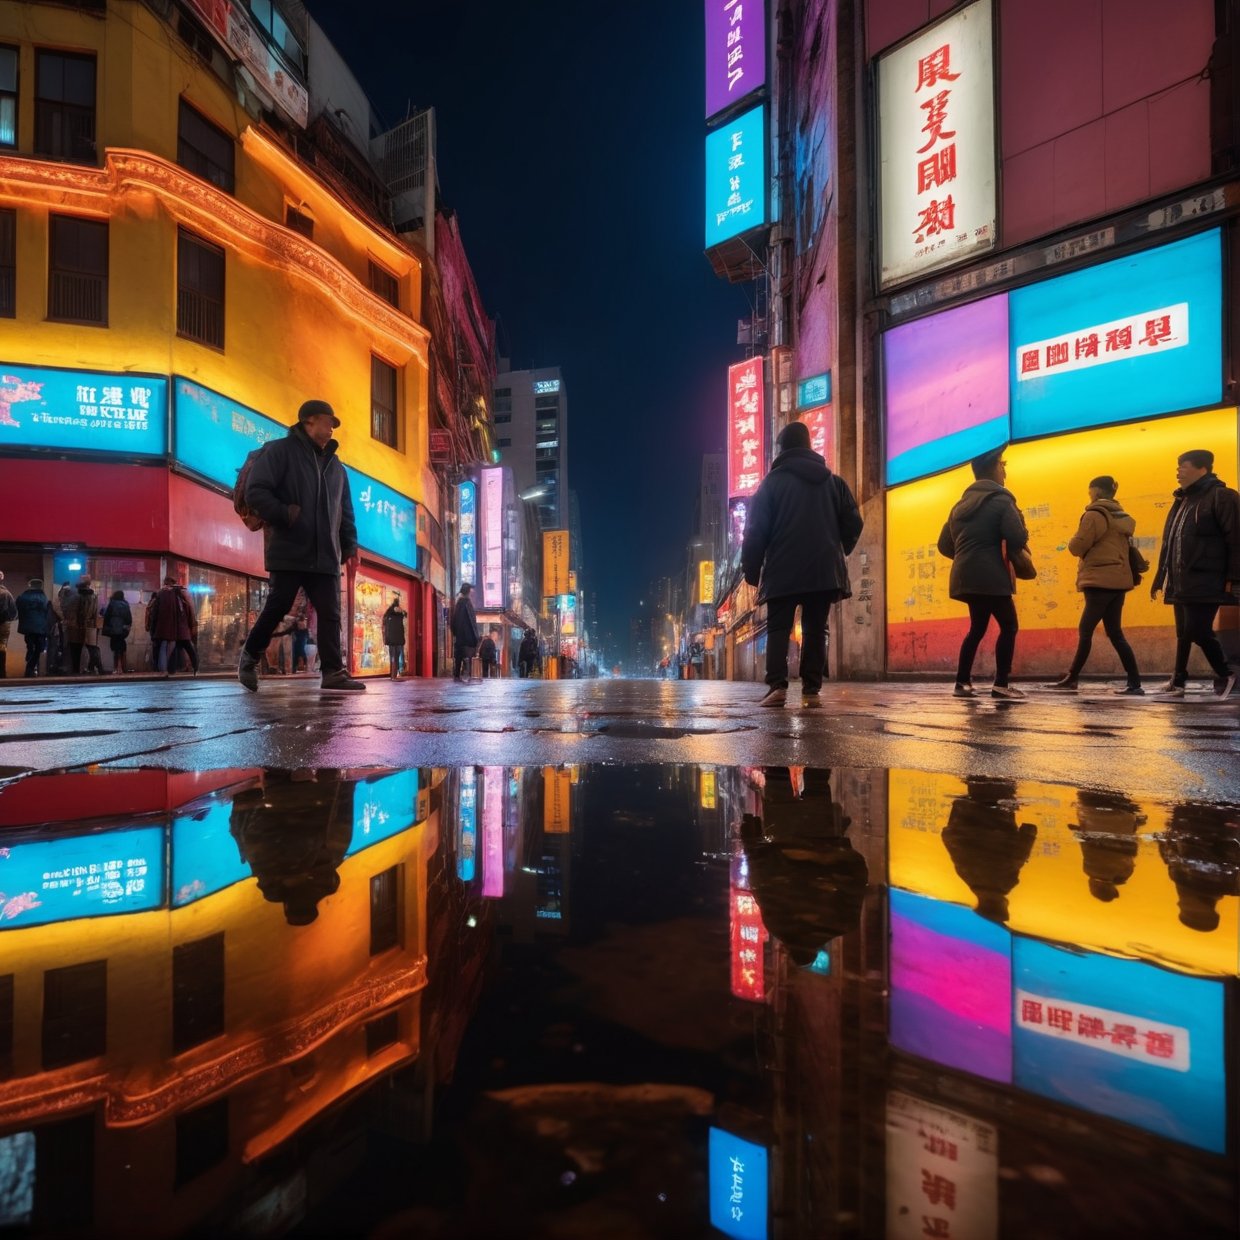 city,people,night,(best quality,4k,8k,highres,masterpiece:1.2),portrait,urban,surreal,detailed buildings,shining lights,neon signs,vibrant colors,street scene,lively atmosphere,exciting energy,bustling crowds,dynamic motion,nightlife,evocative shadows,reflection in puddles,contrast,busy traffic,mysterious alleyways,architecture details,moody ambience,moonlit sky,cityscape silhouette,artistic composition,movement,urban exploration,authenticity,lifelike portrait,expressive faces,storytelling,diversity and inclusivity,interactions,dynamic street photography,raw emotions,realistic textures,city lights reflecting on wet streets,blurred motion of passing cars,glowing skyscrapers,exploring the unknown corners of the city,unique characters,hidden stories to discover,nighttime adventures in the city that never sleeps.